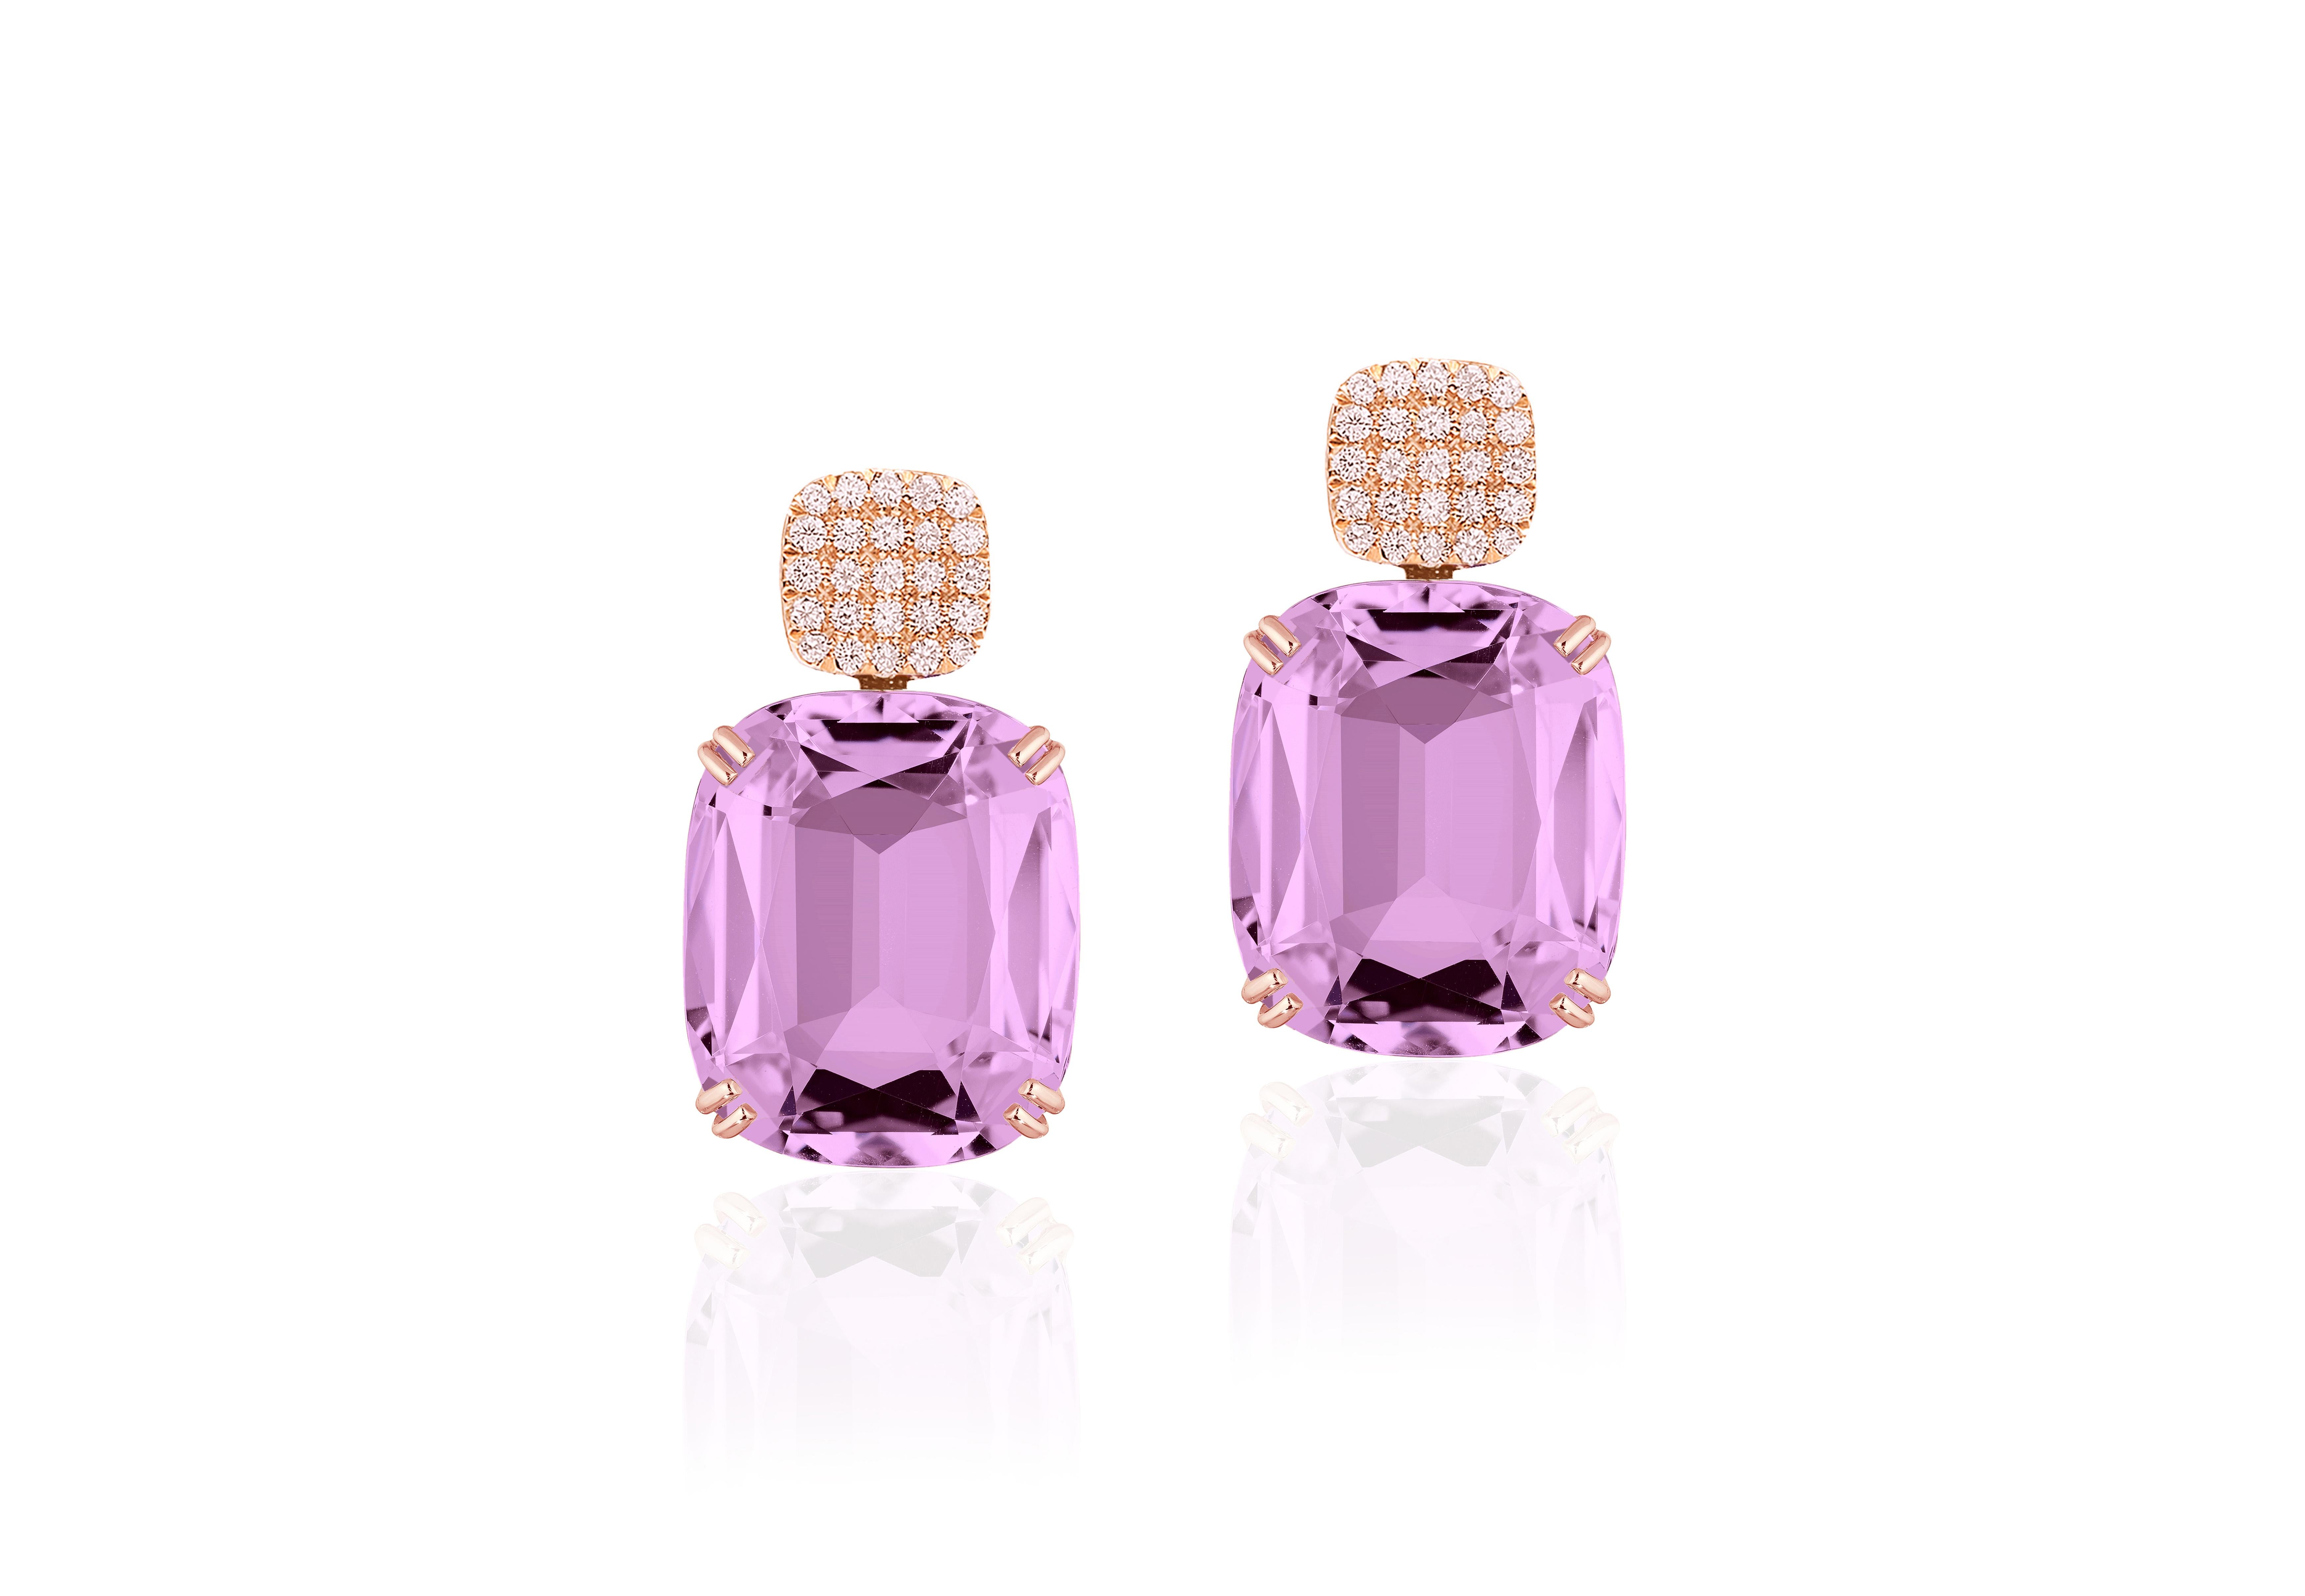 Introducing the stunning lavender amethyst Cushion & Diamonds Earrings from our popular 'Gossip' Collection. 
The focal point of these earrings is the mesmerizing lavender amethyst cushion-cut gemstone. The cushion-cut shape adds a touch of vintage